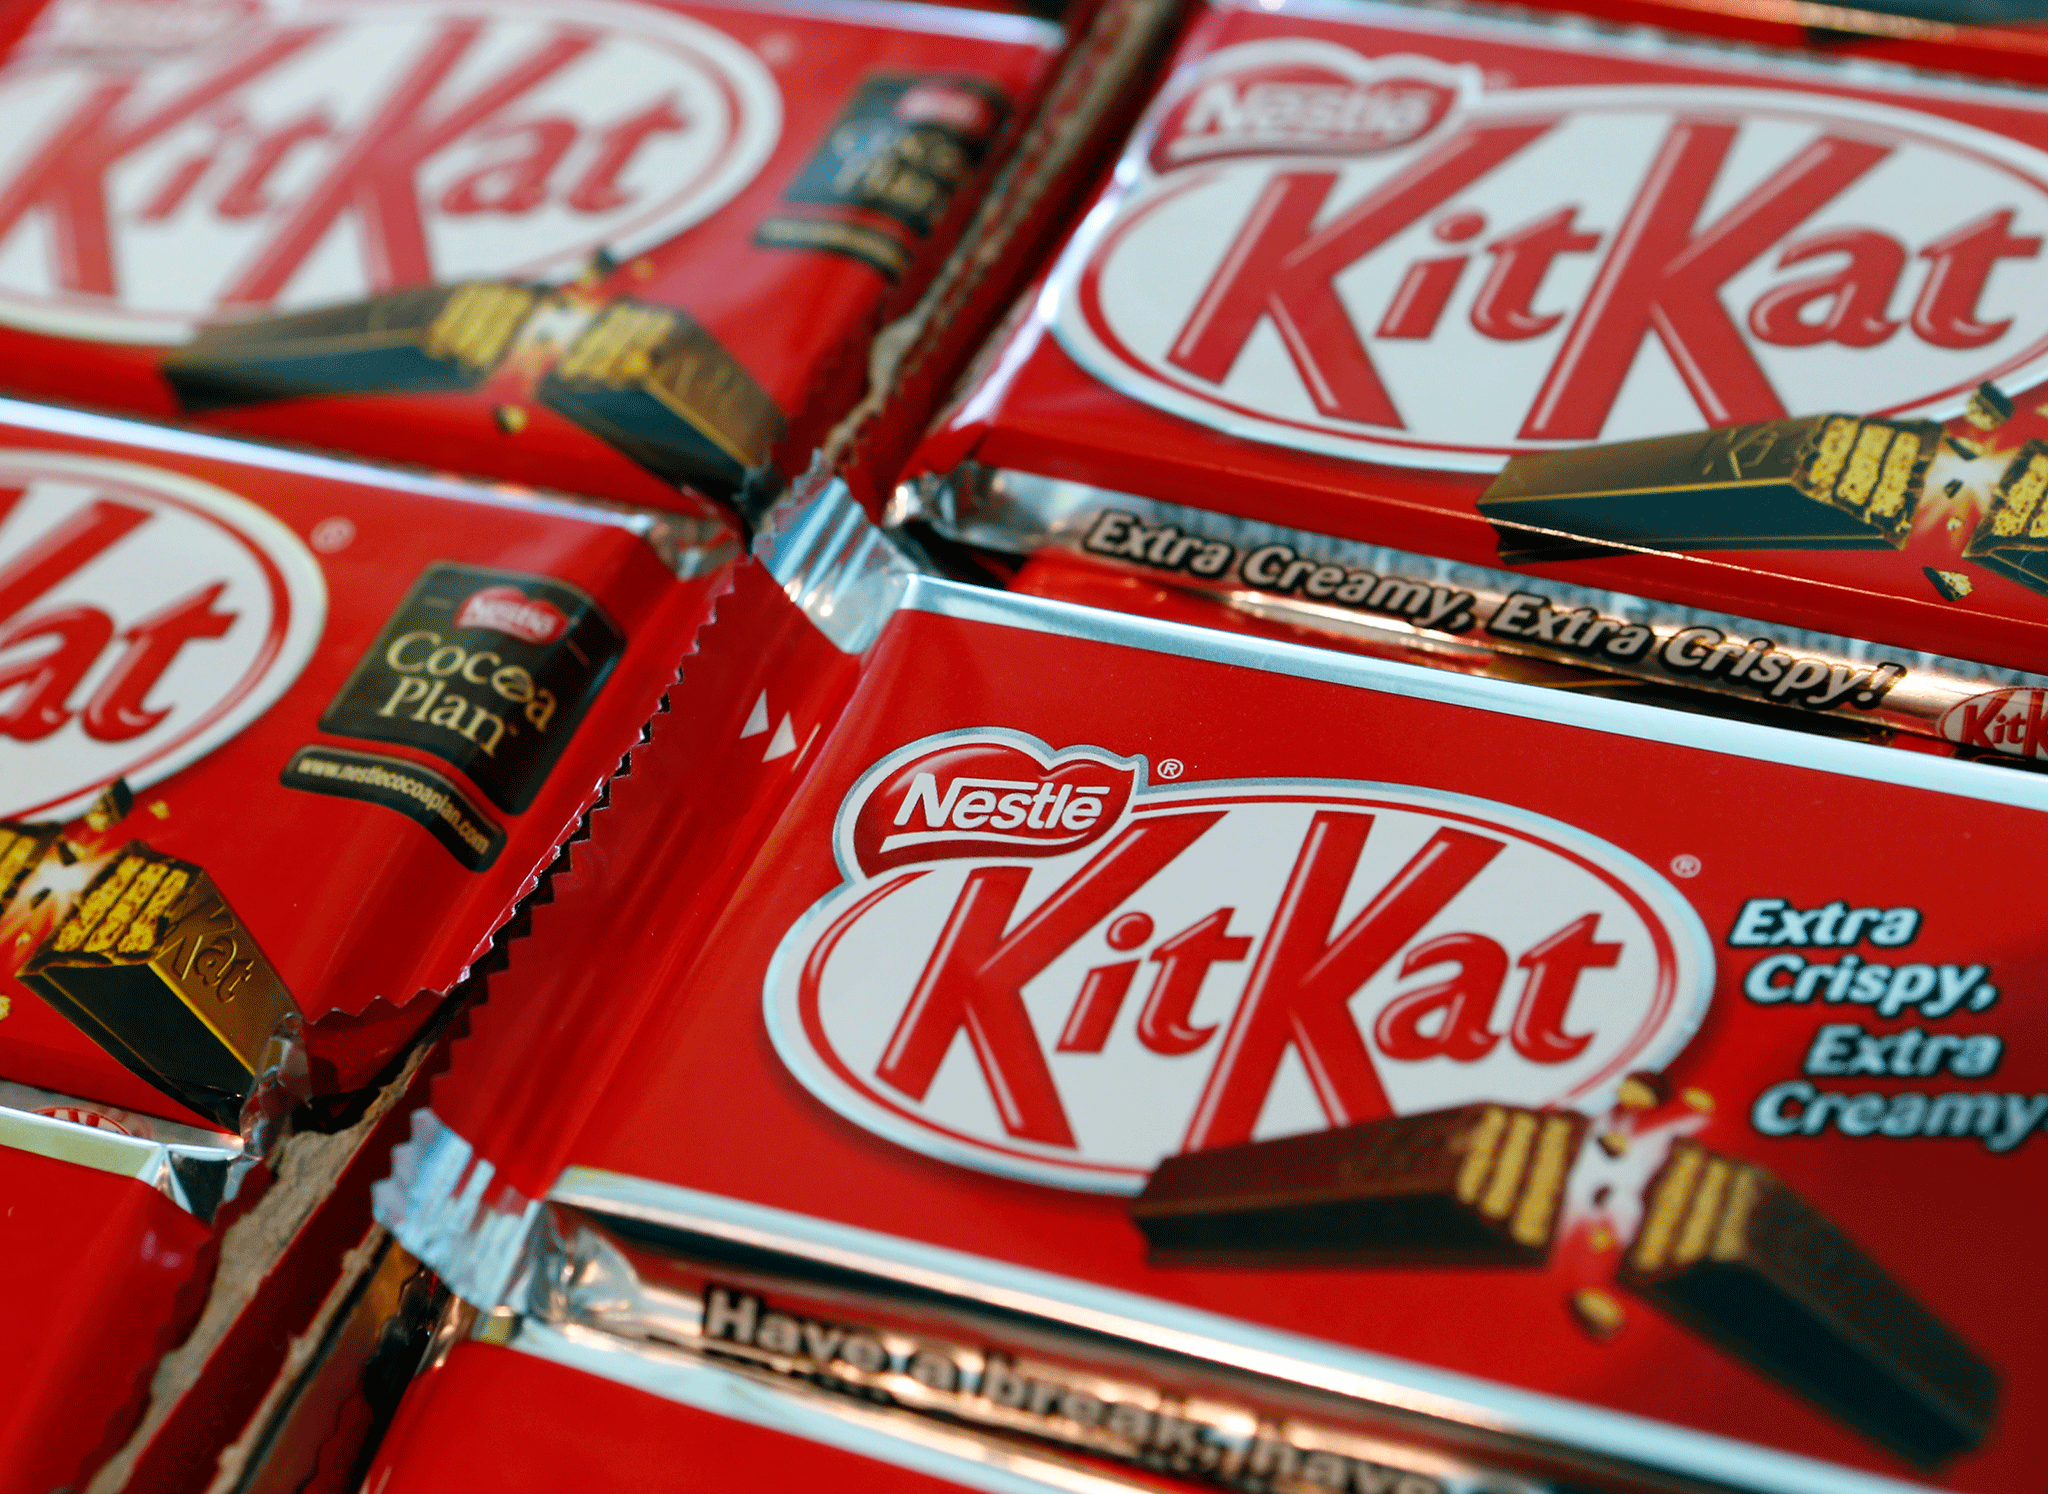 Nestlé dismissed fears of a Kit Kat chocolate price hike amid sterling’s plunge